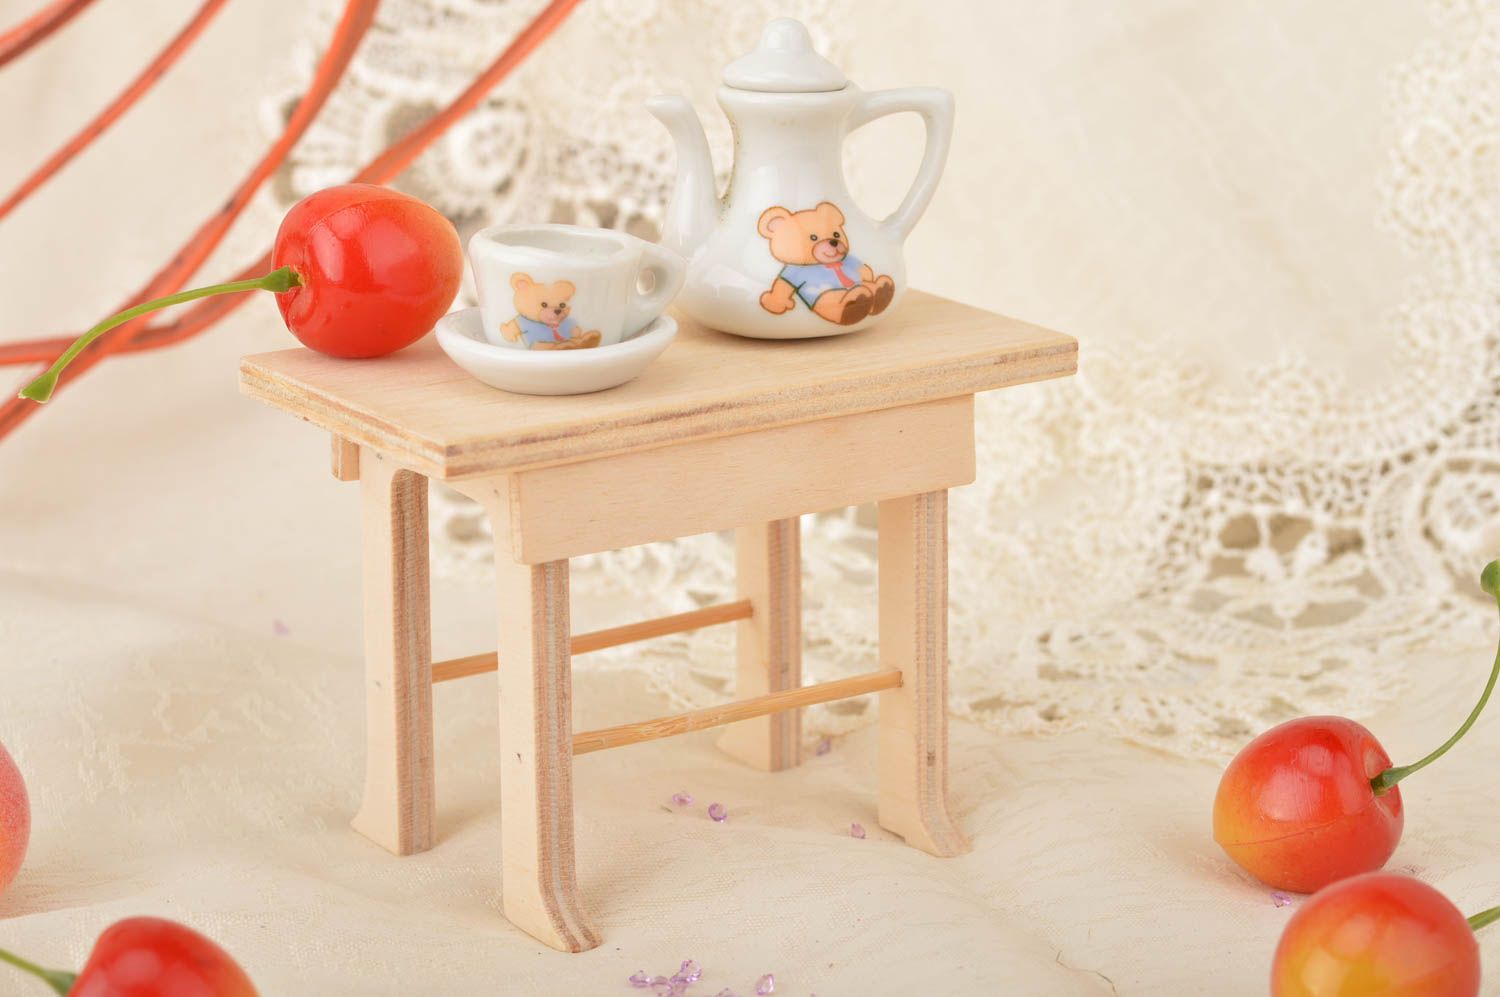 Small handmade designer plywood table for doll stylish toy furniture baby gift photo 1